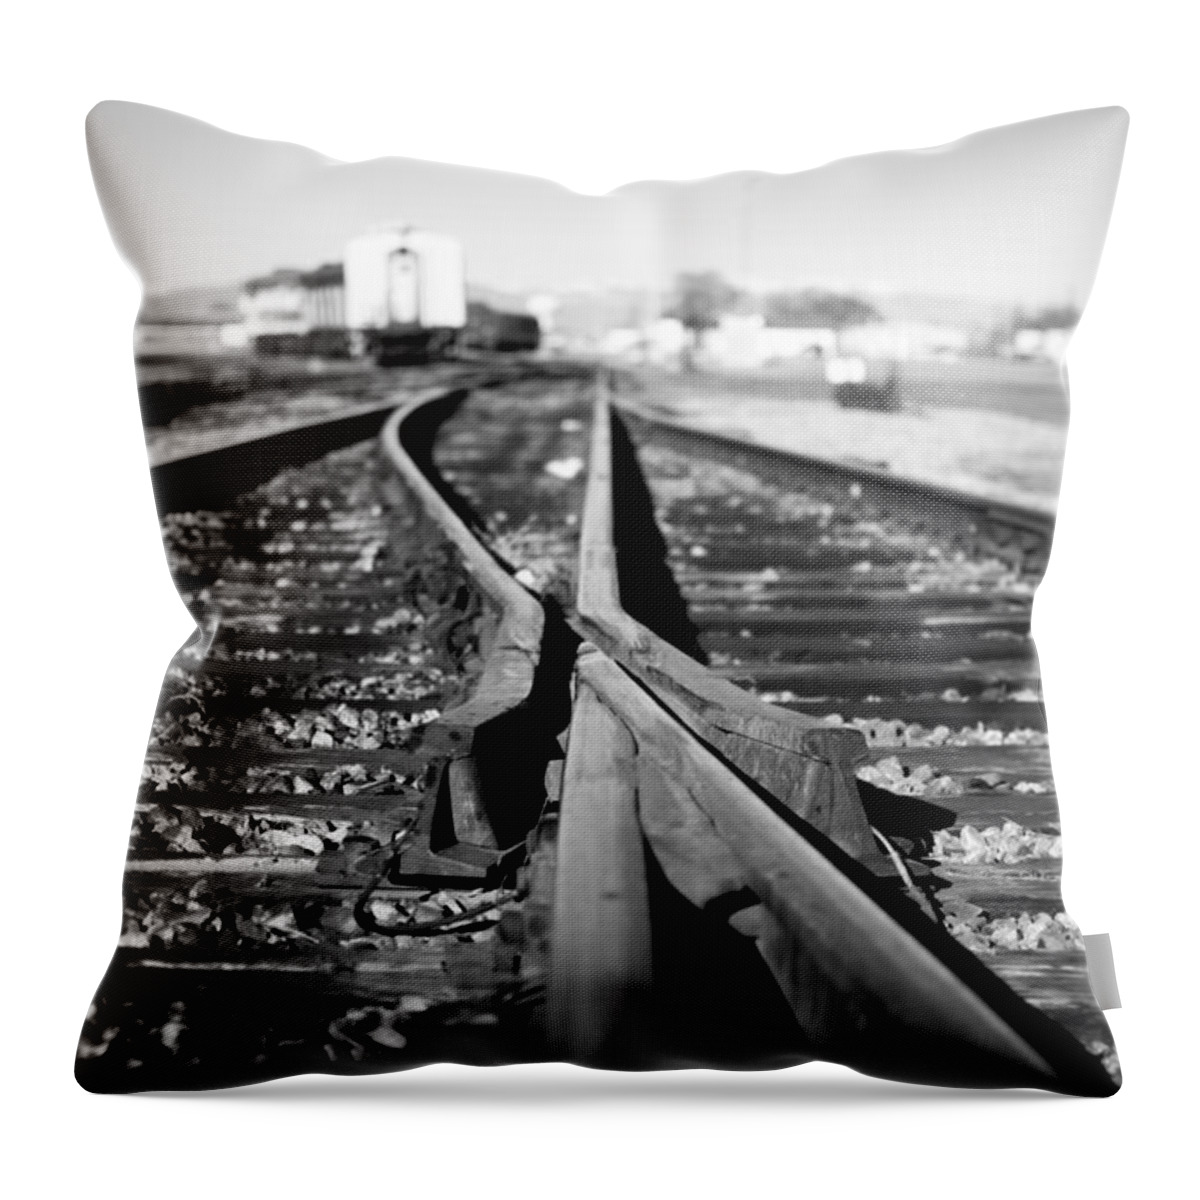 Frog Throw Pillow featuring the photograph Frog by Stephen Holst